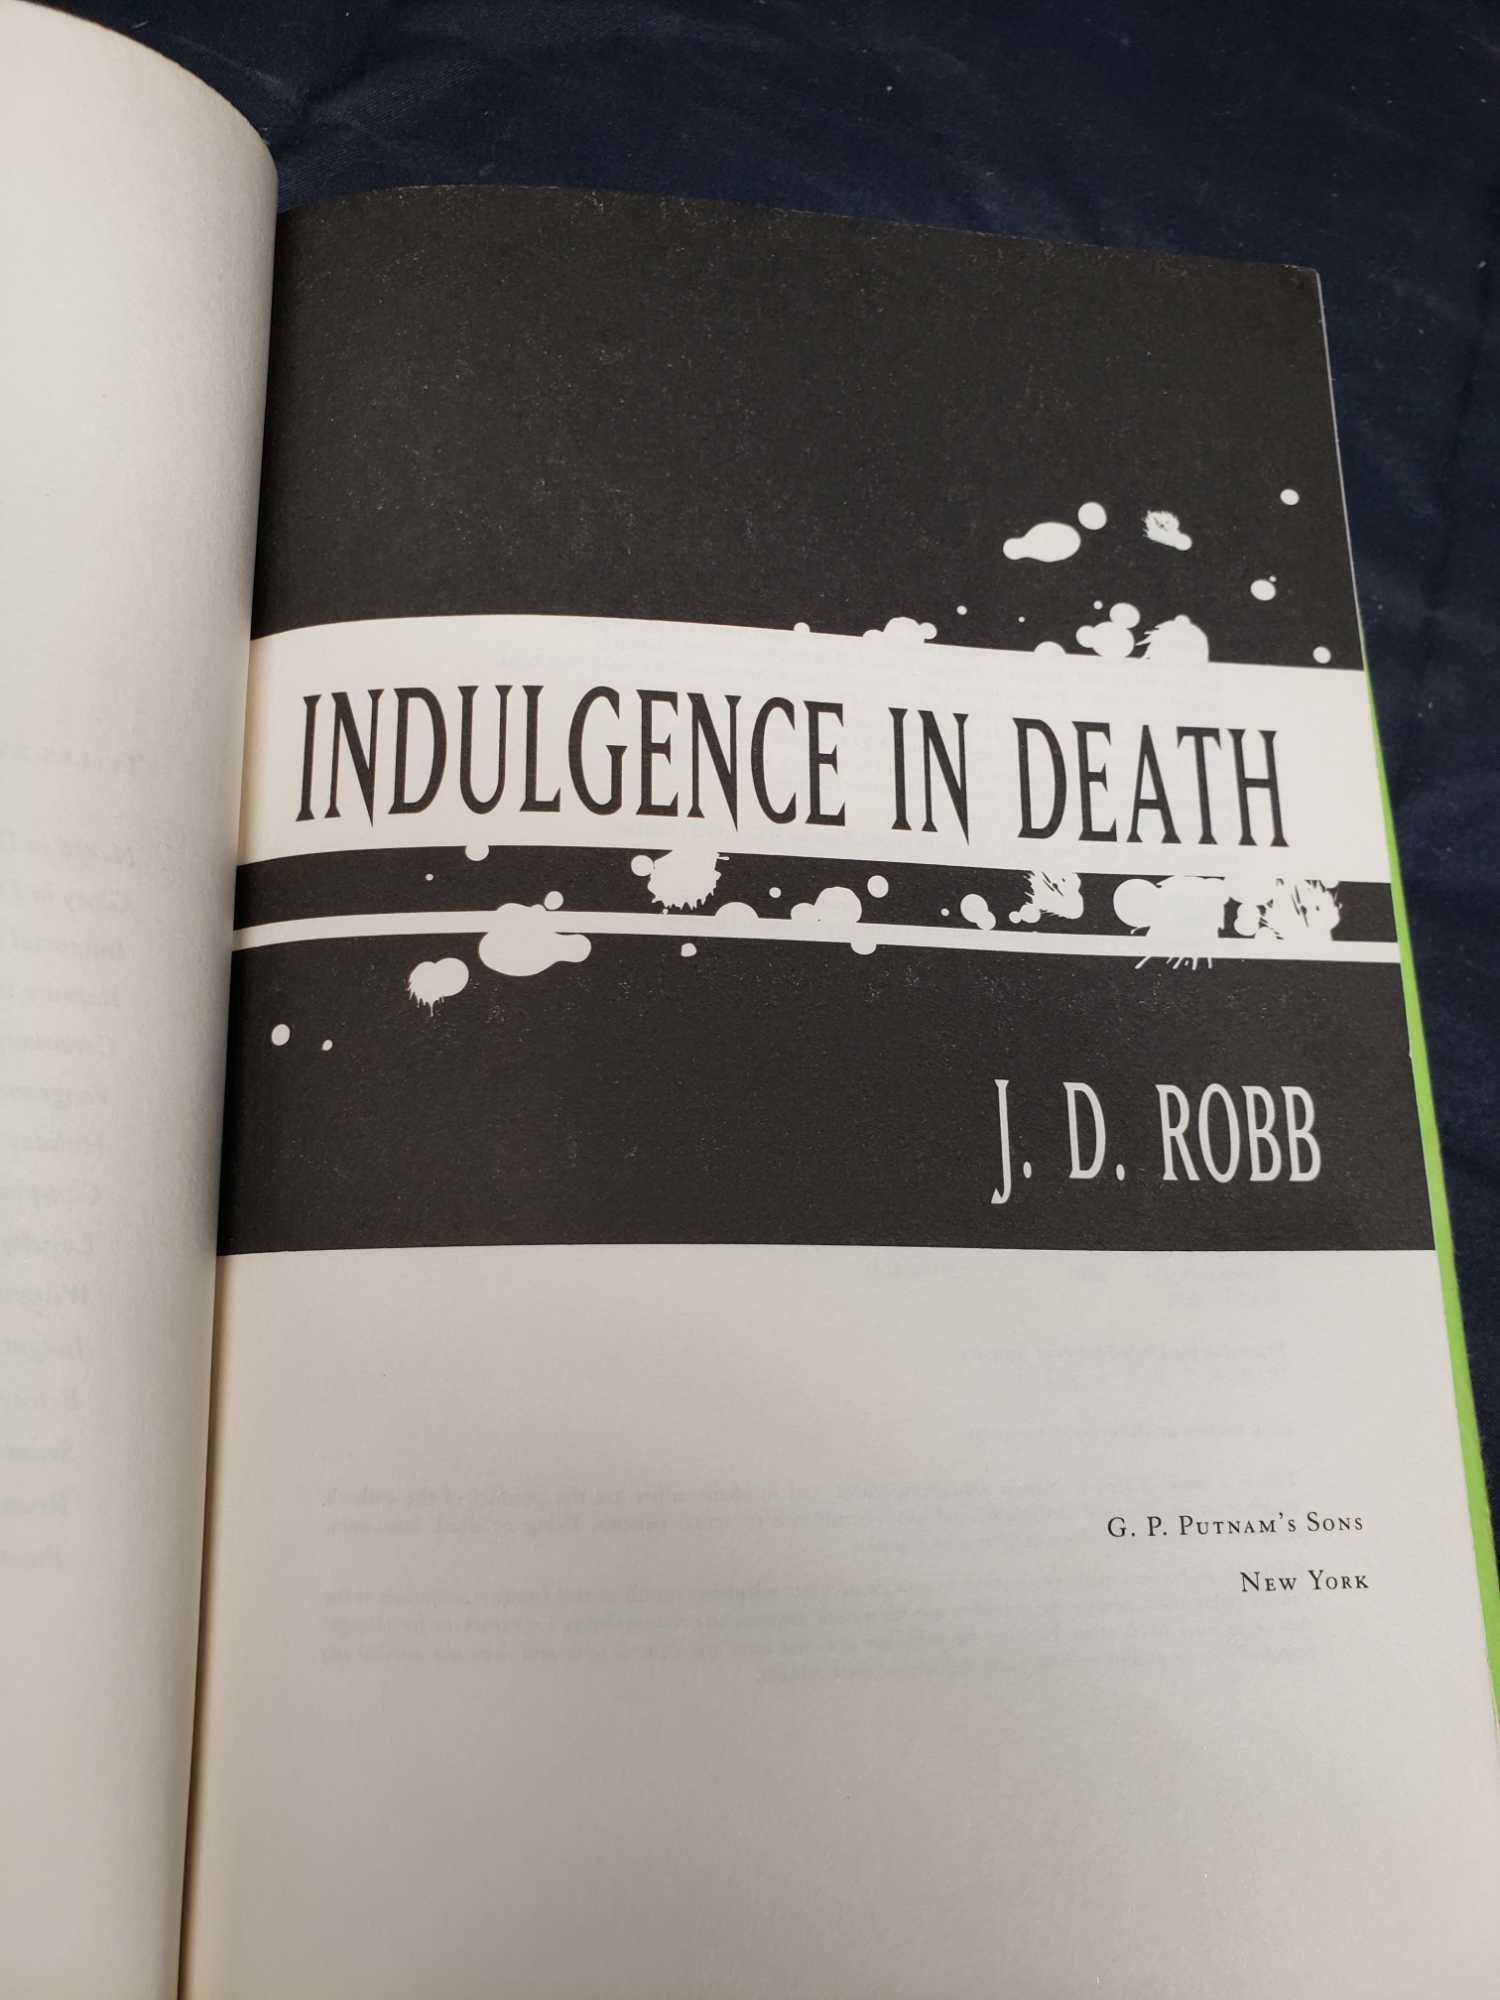 3 hard back books. Rowlings Harry Potter and the Deathly Hollows. JD RoBB Indulgence in Death and